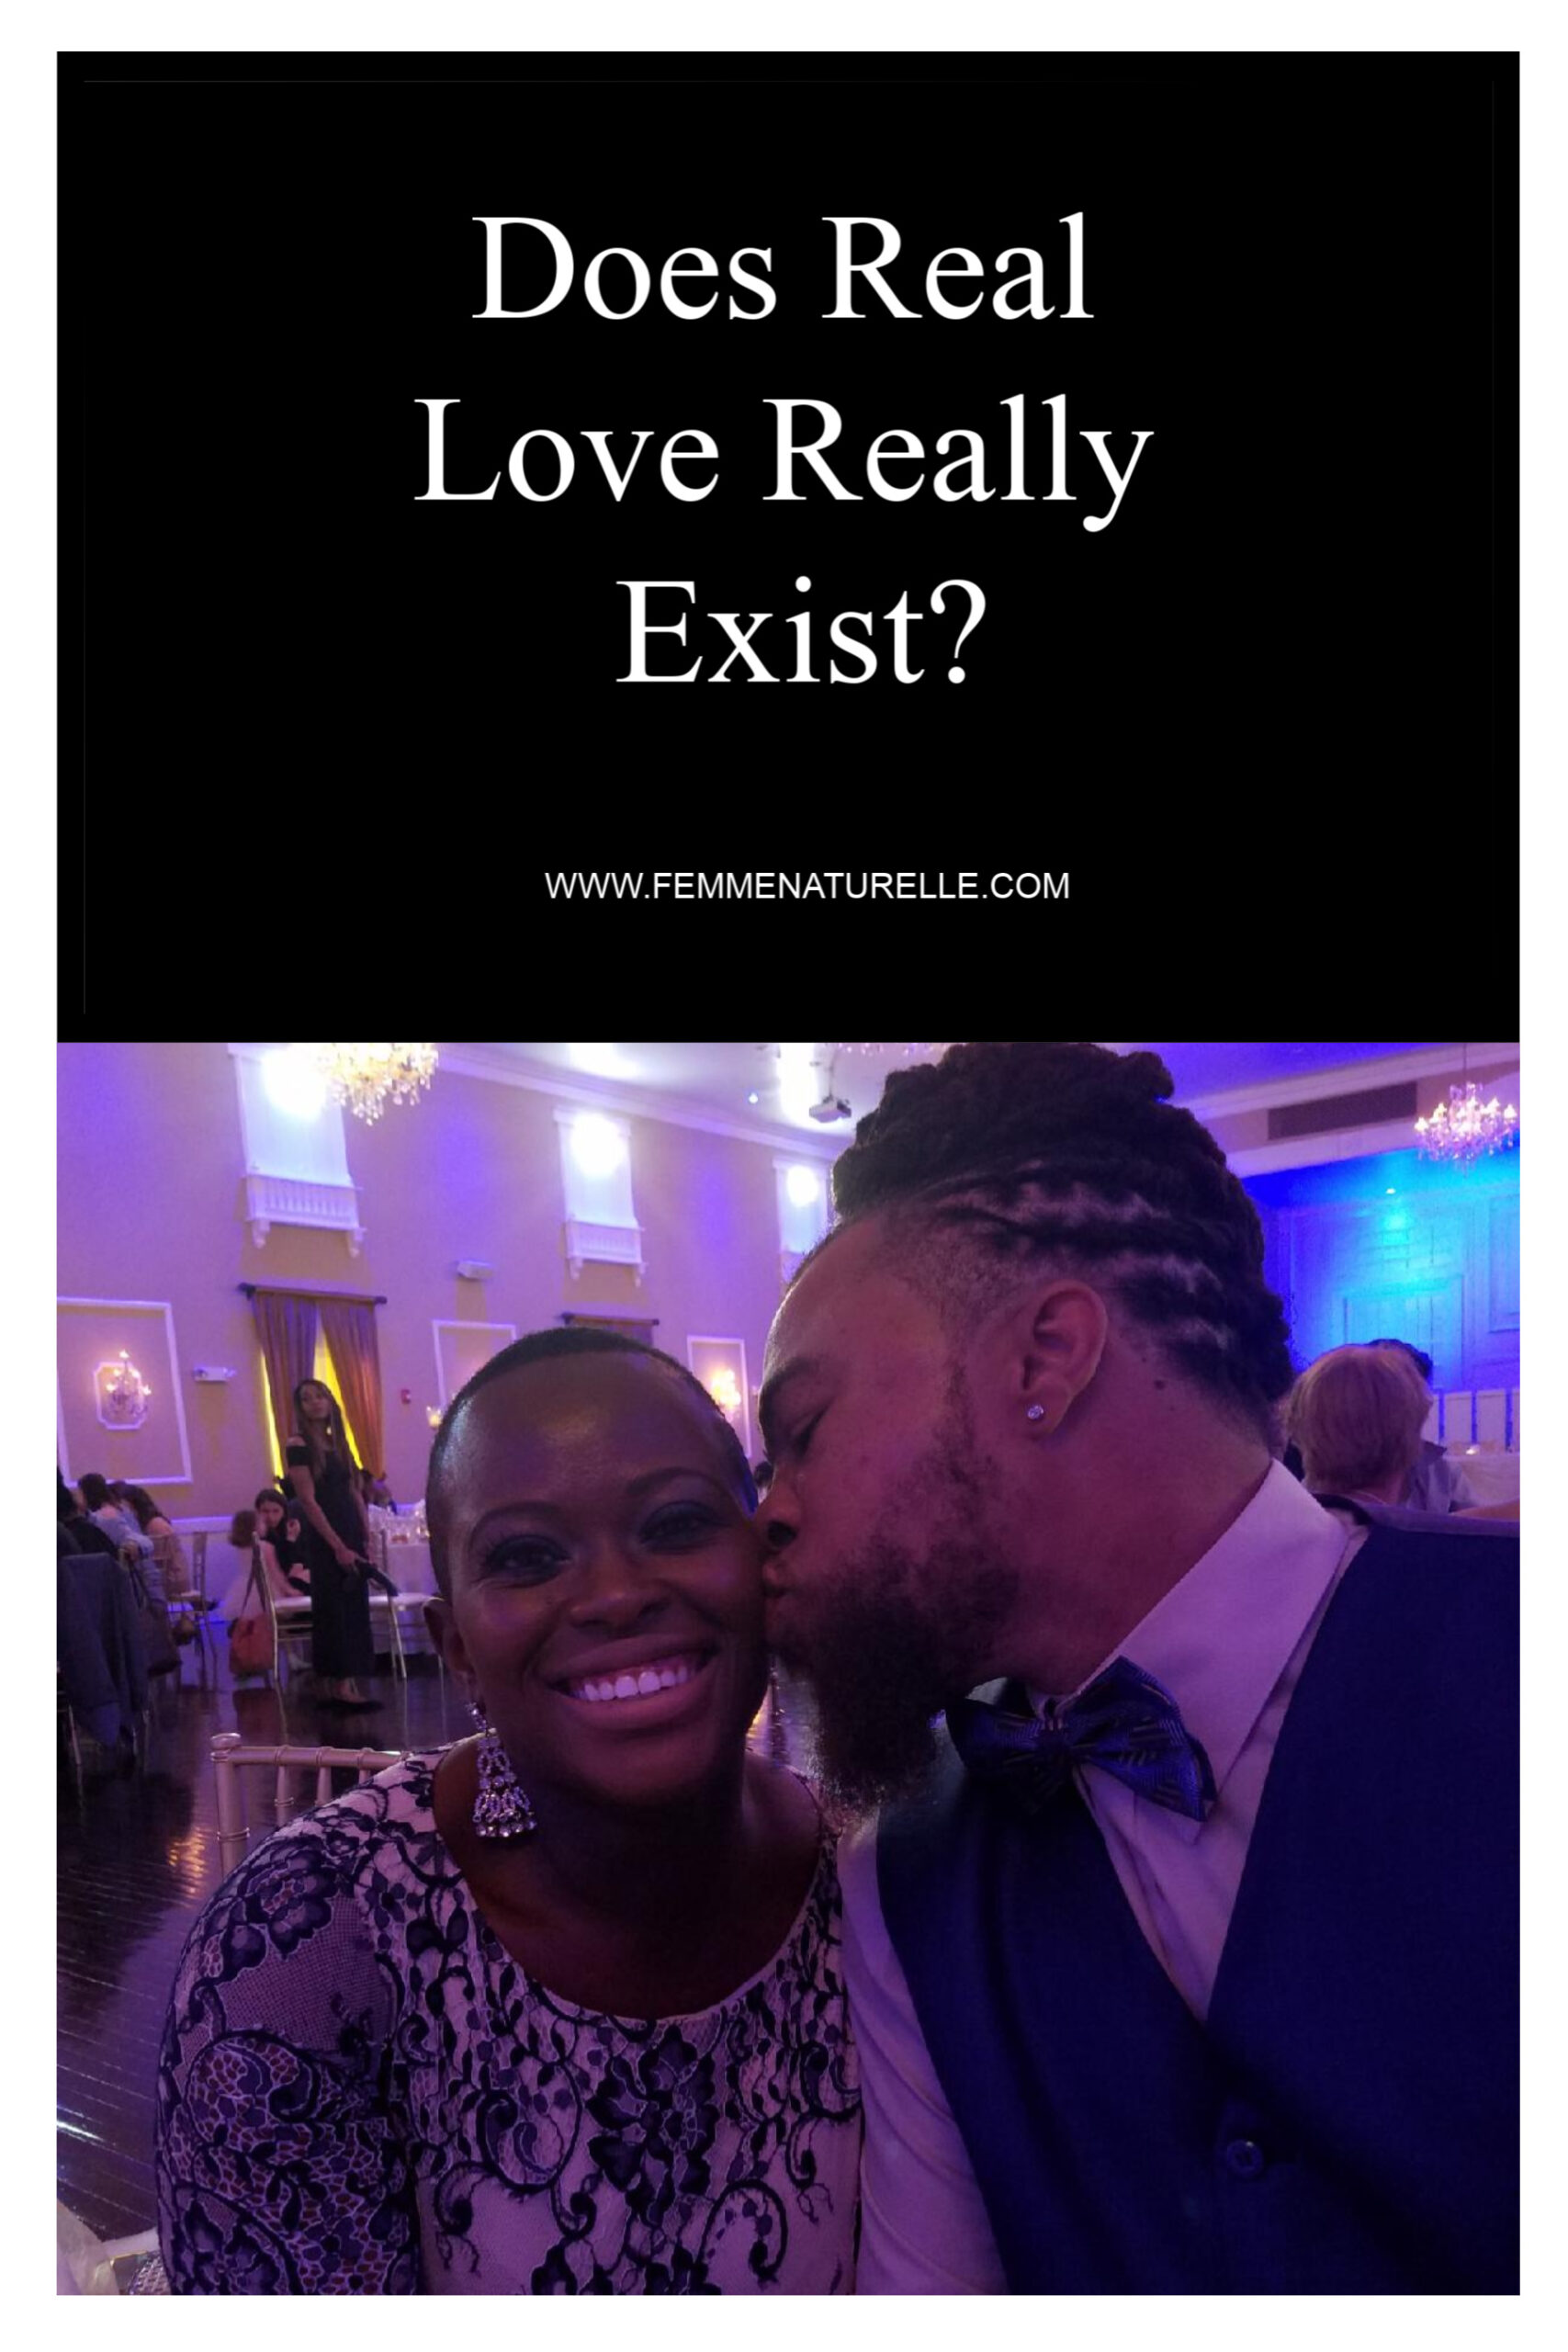 Does Real Love Really Exist?